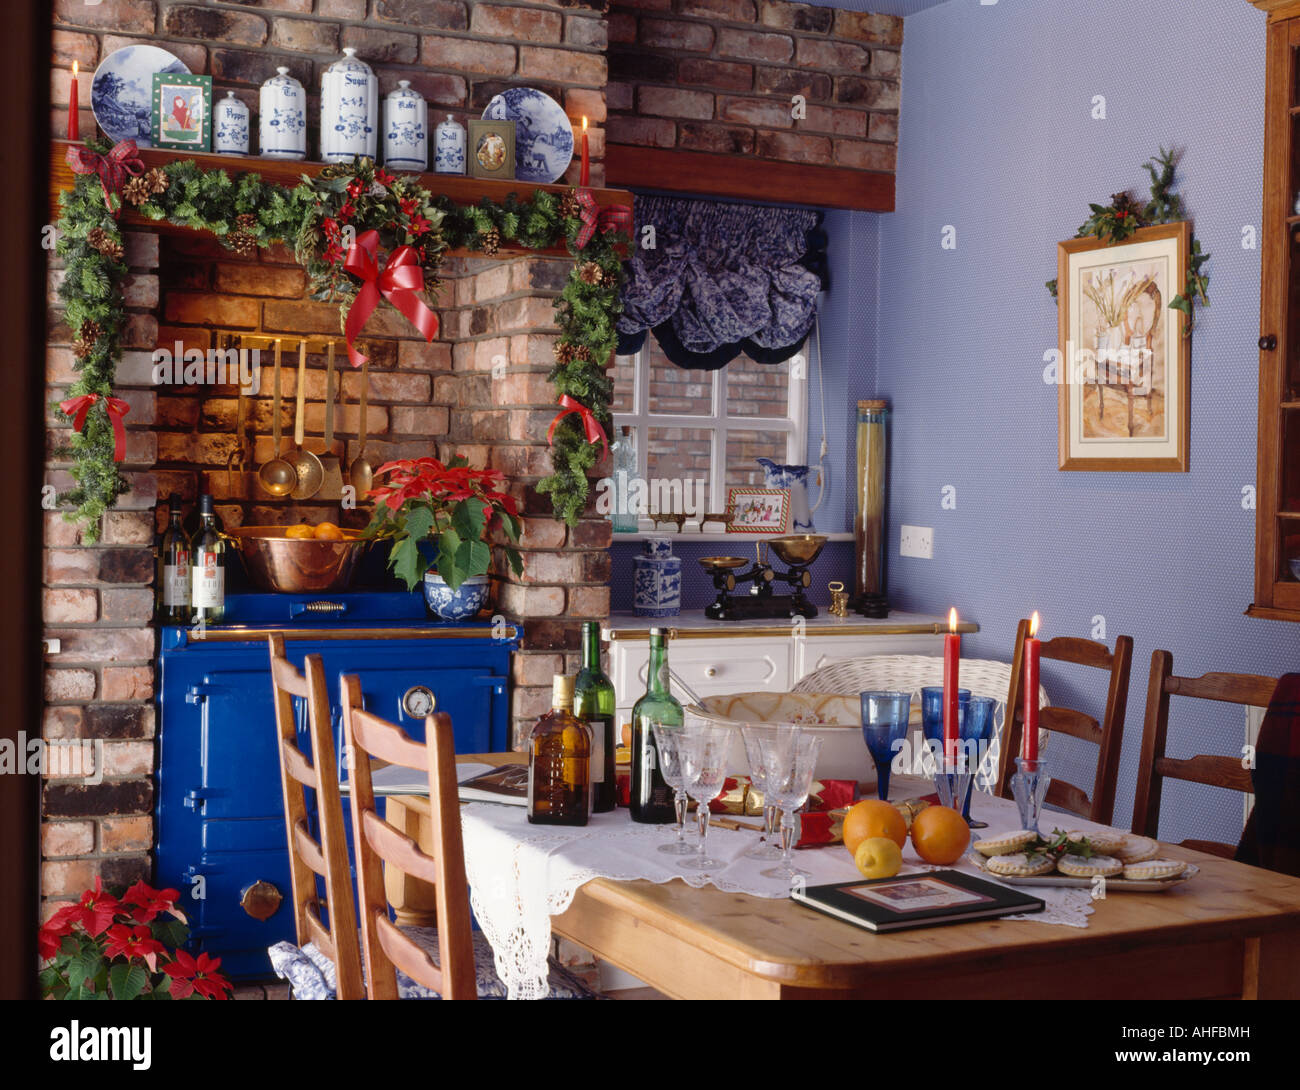 Ivy garland above brick fireplace with blue Rayburn oven in blue country kitchen with table set for Christmas lunch Stock Photo